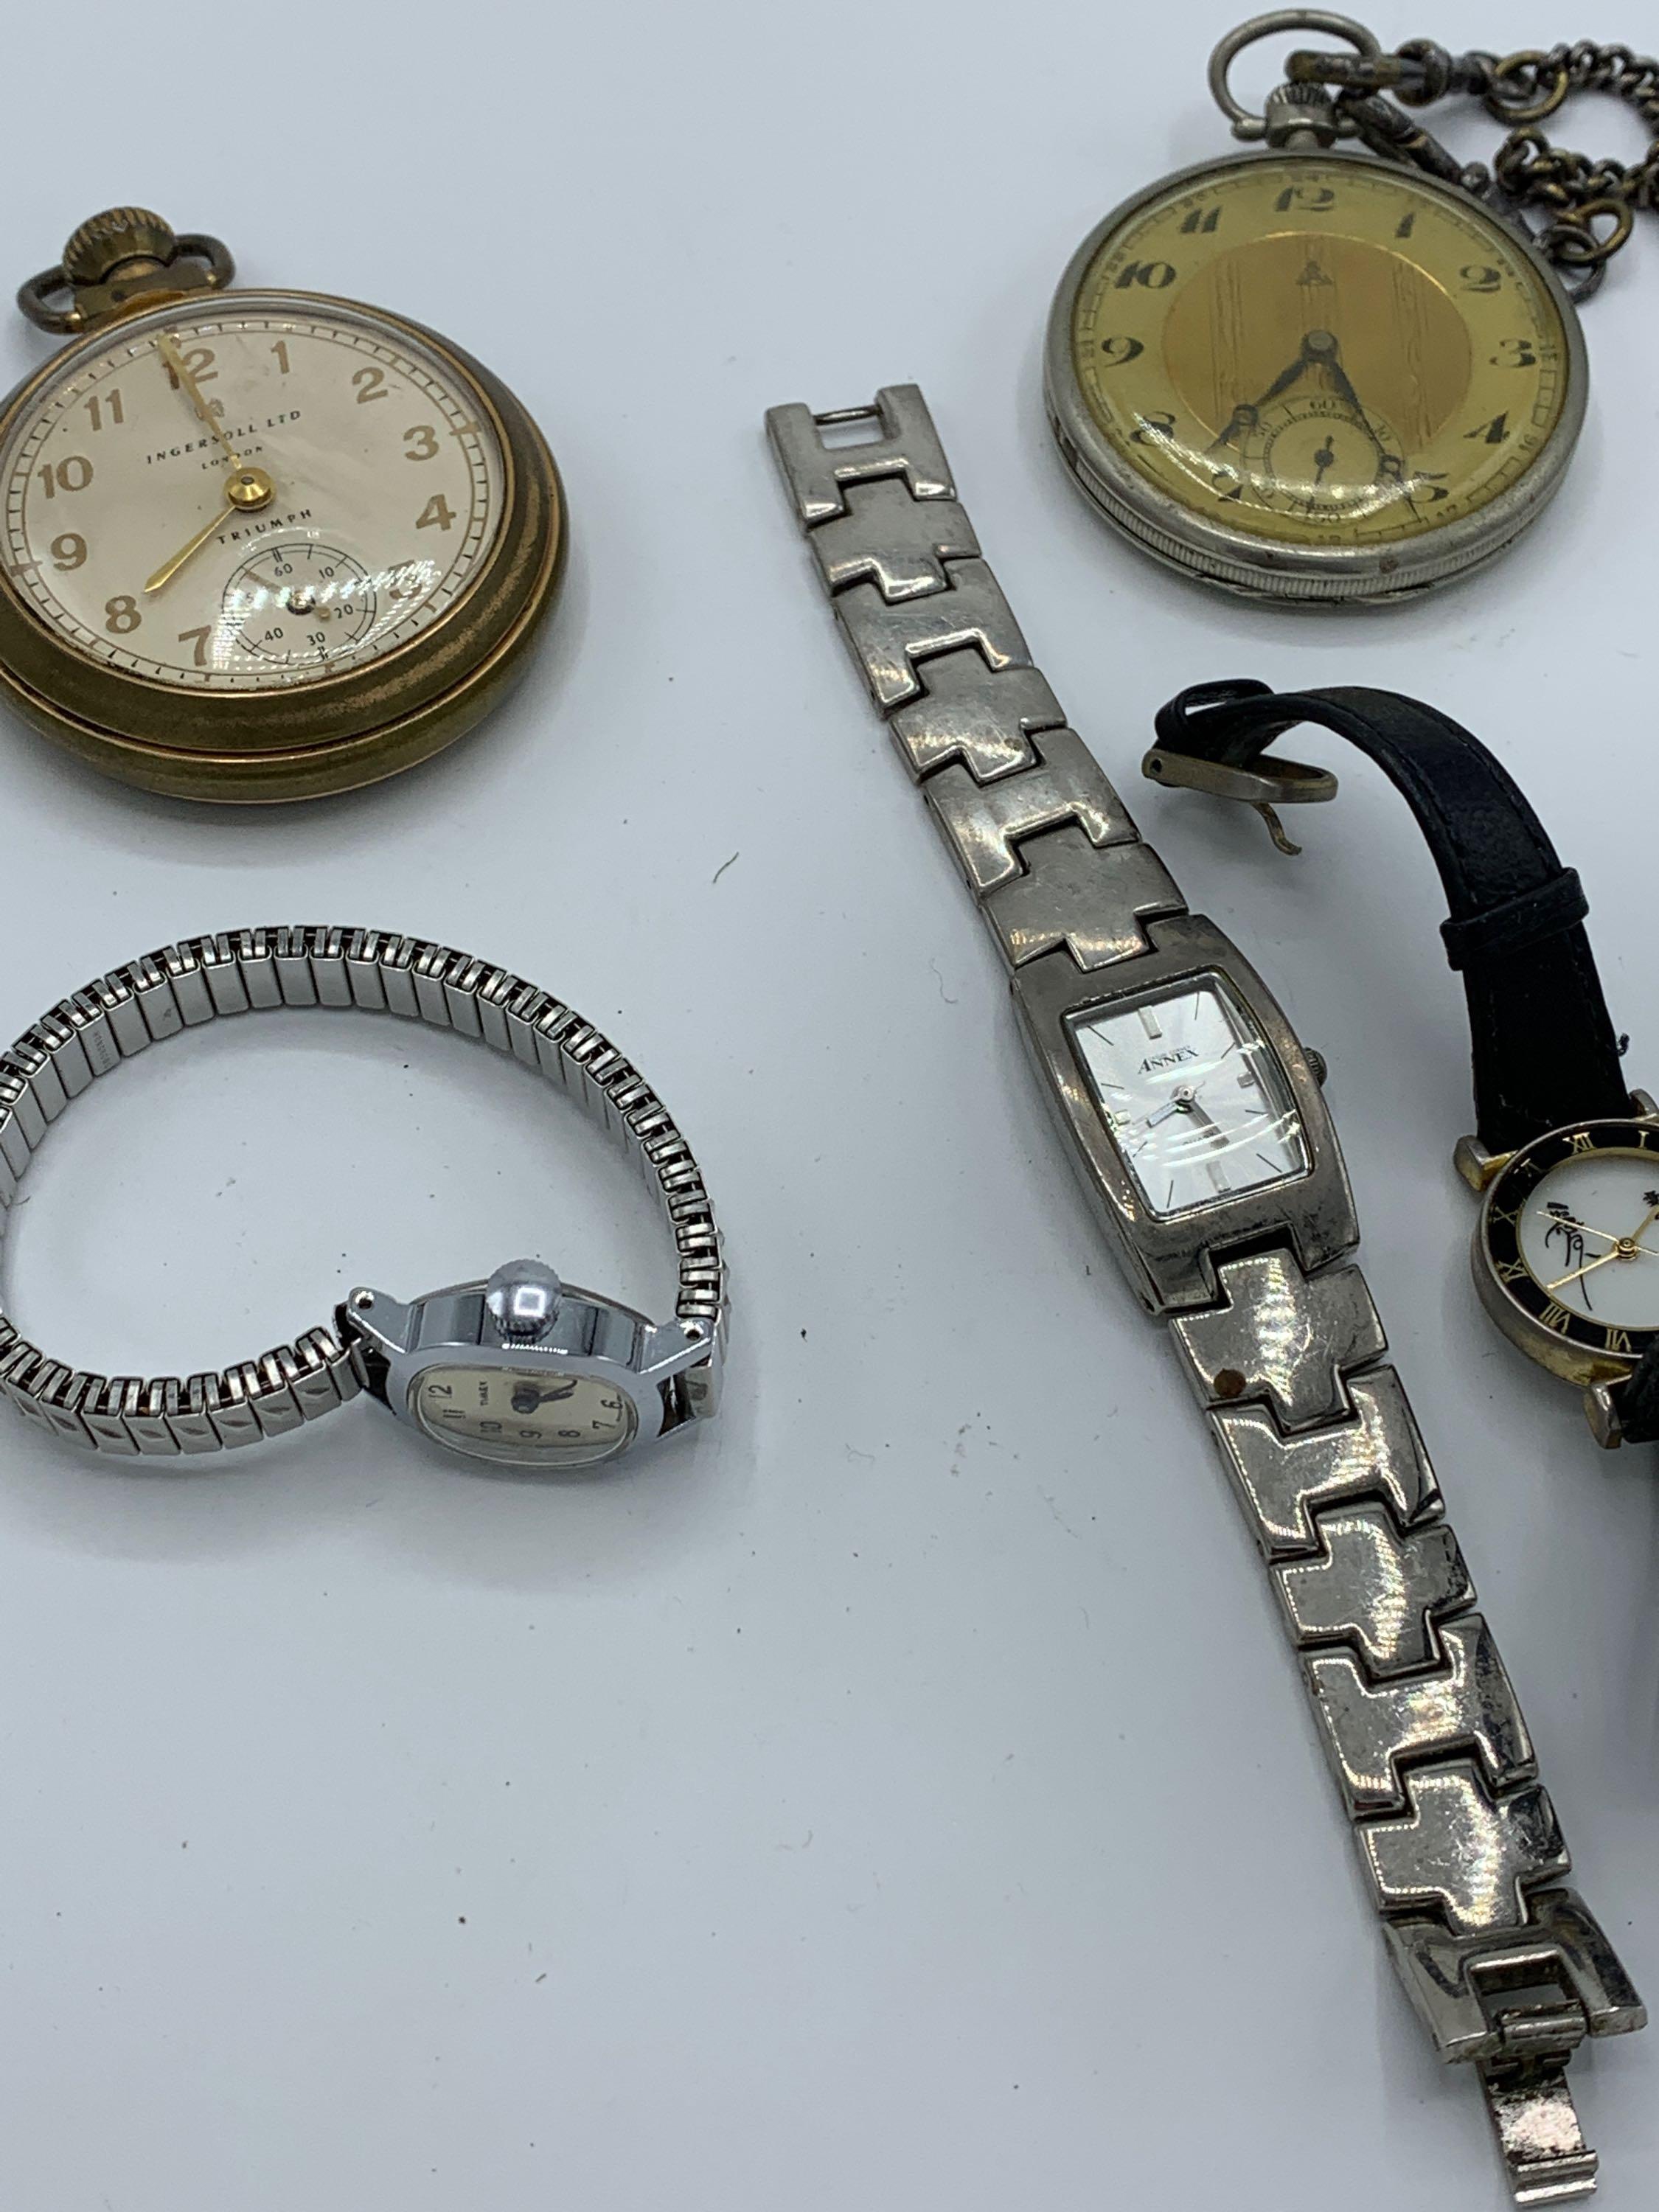 Ingersoll Ltd 'Triumph' pocket watch, Alpina pocket watch, and silver fob chain - Image 2 of 4